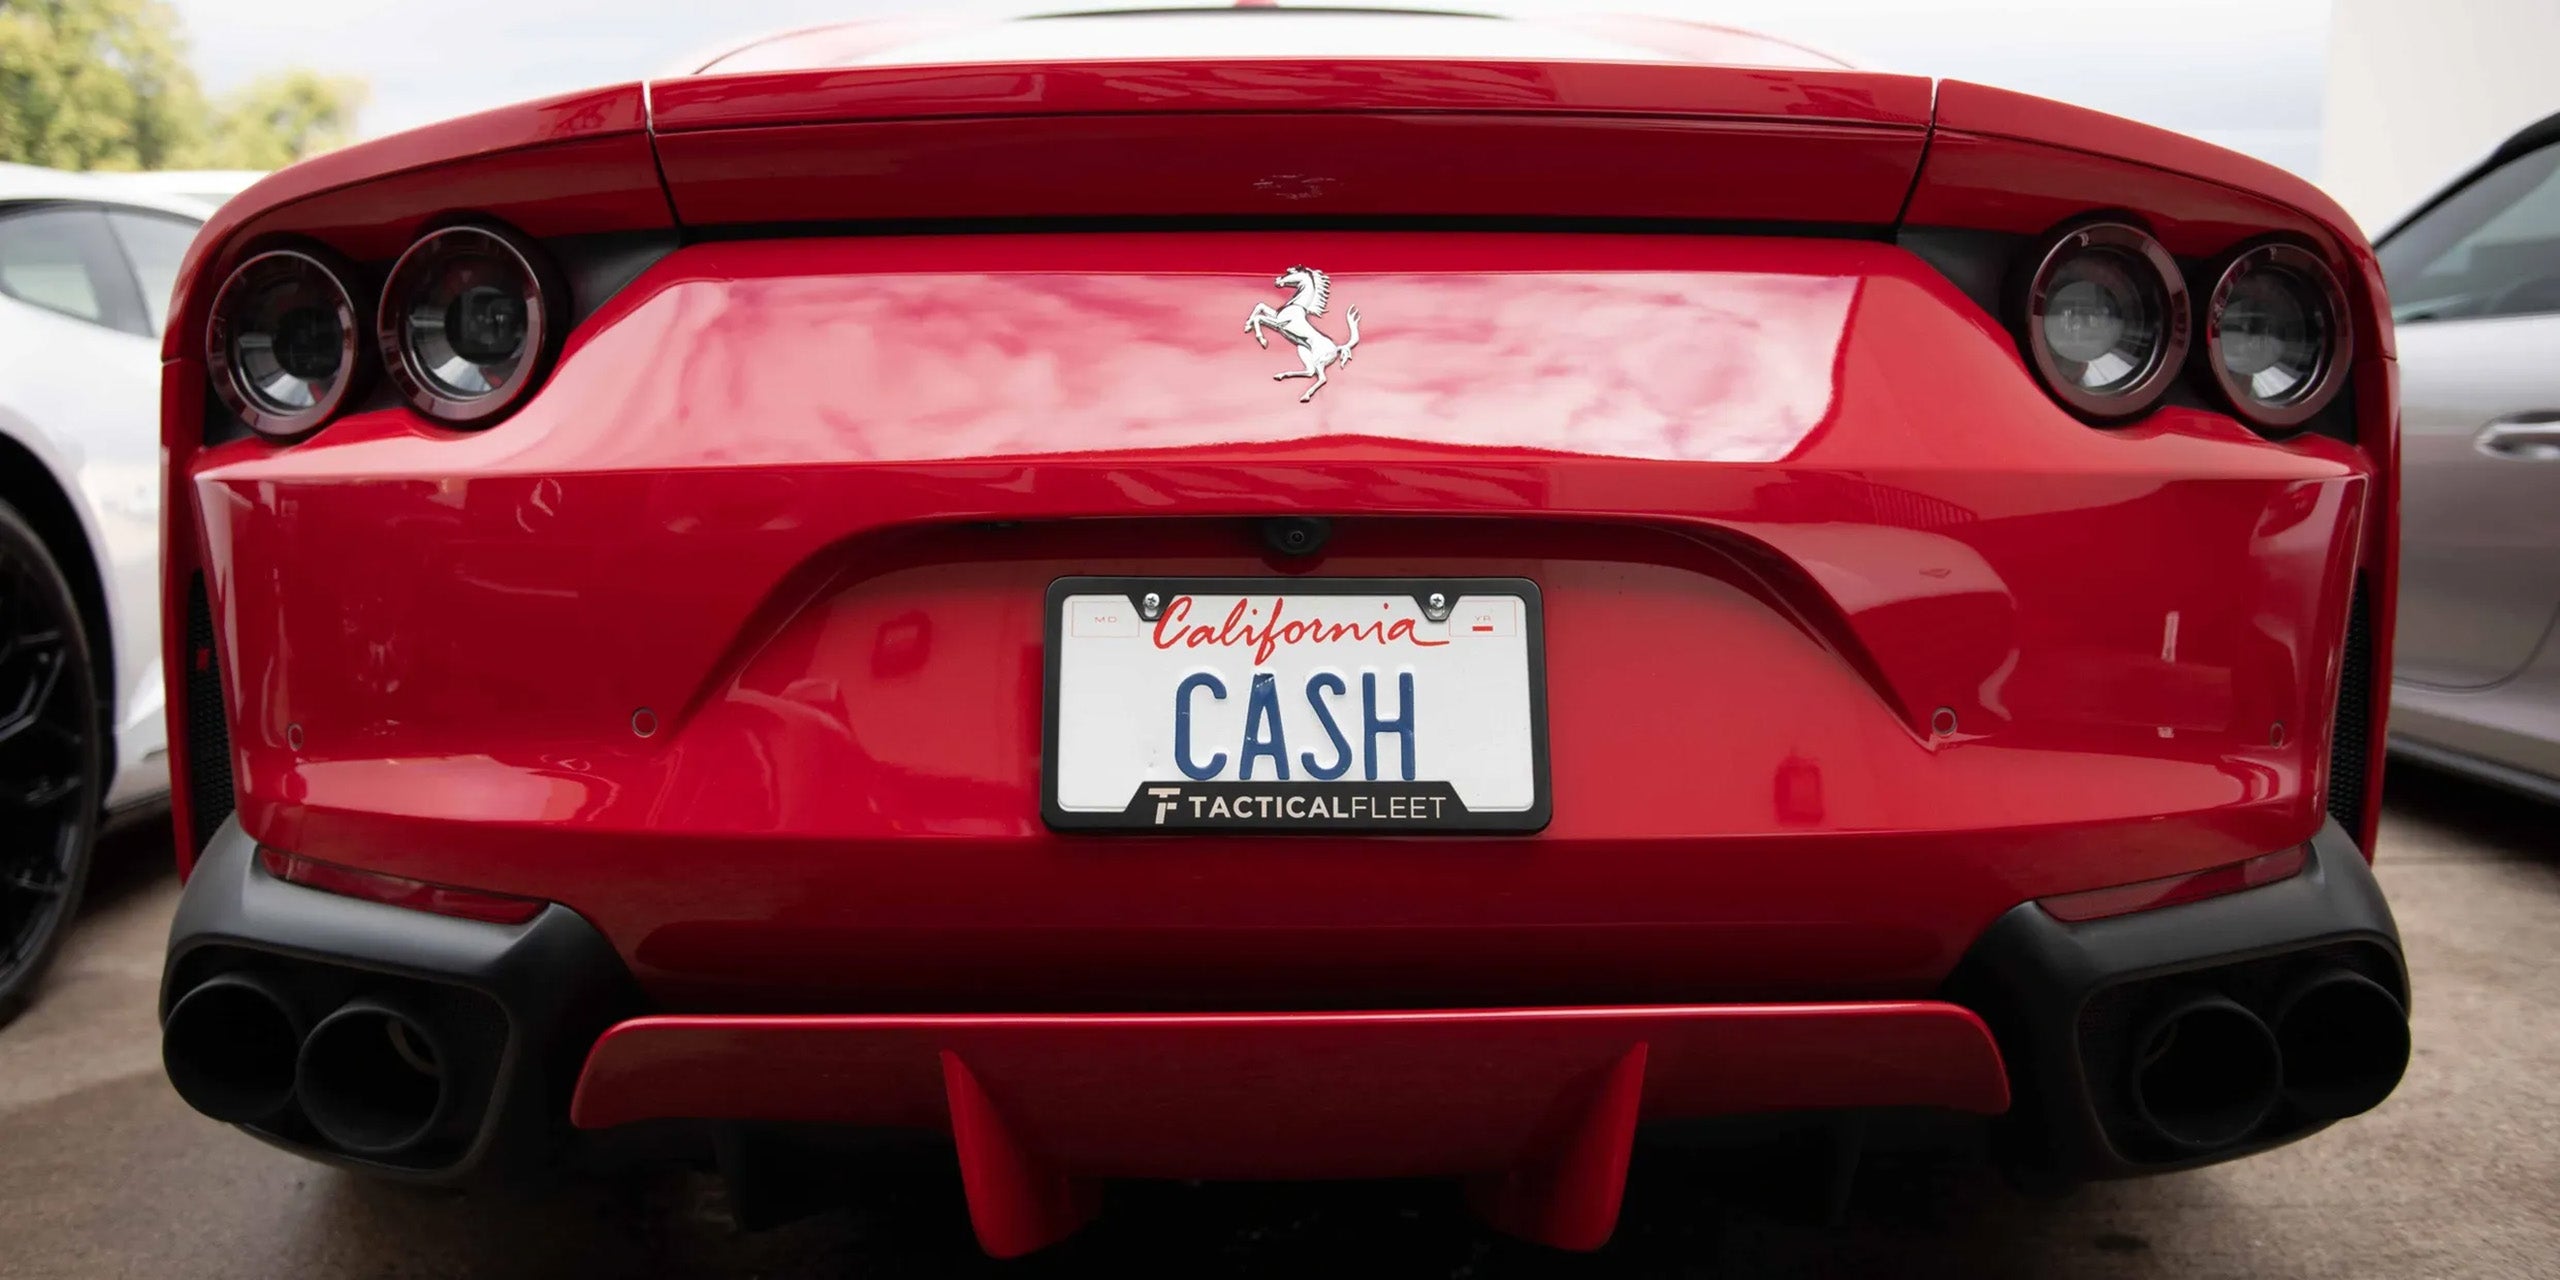 California Man Is Selling His ‘CASH’ Vanity Plate for $2,000,000